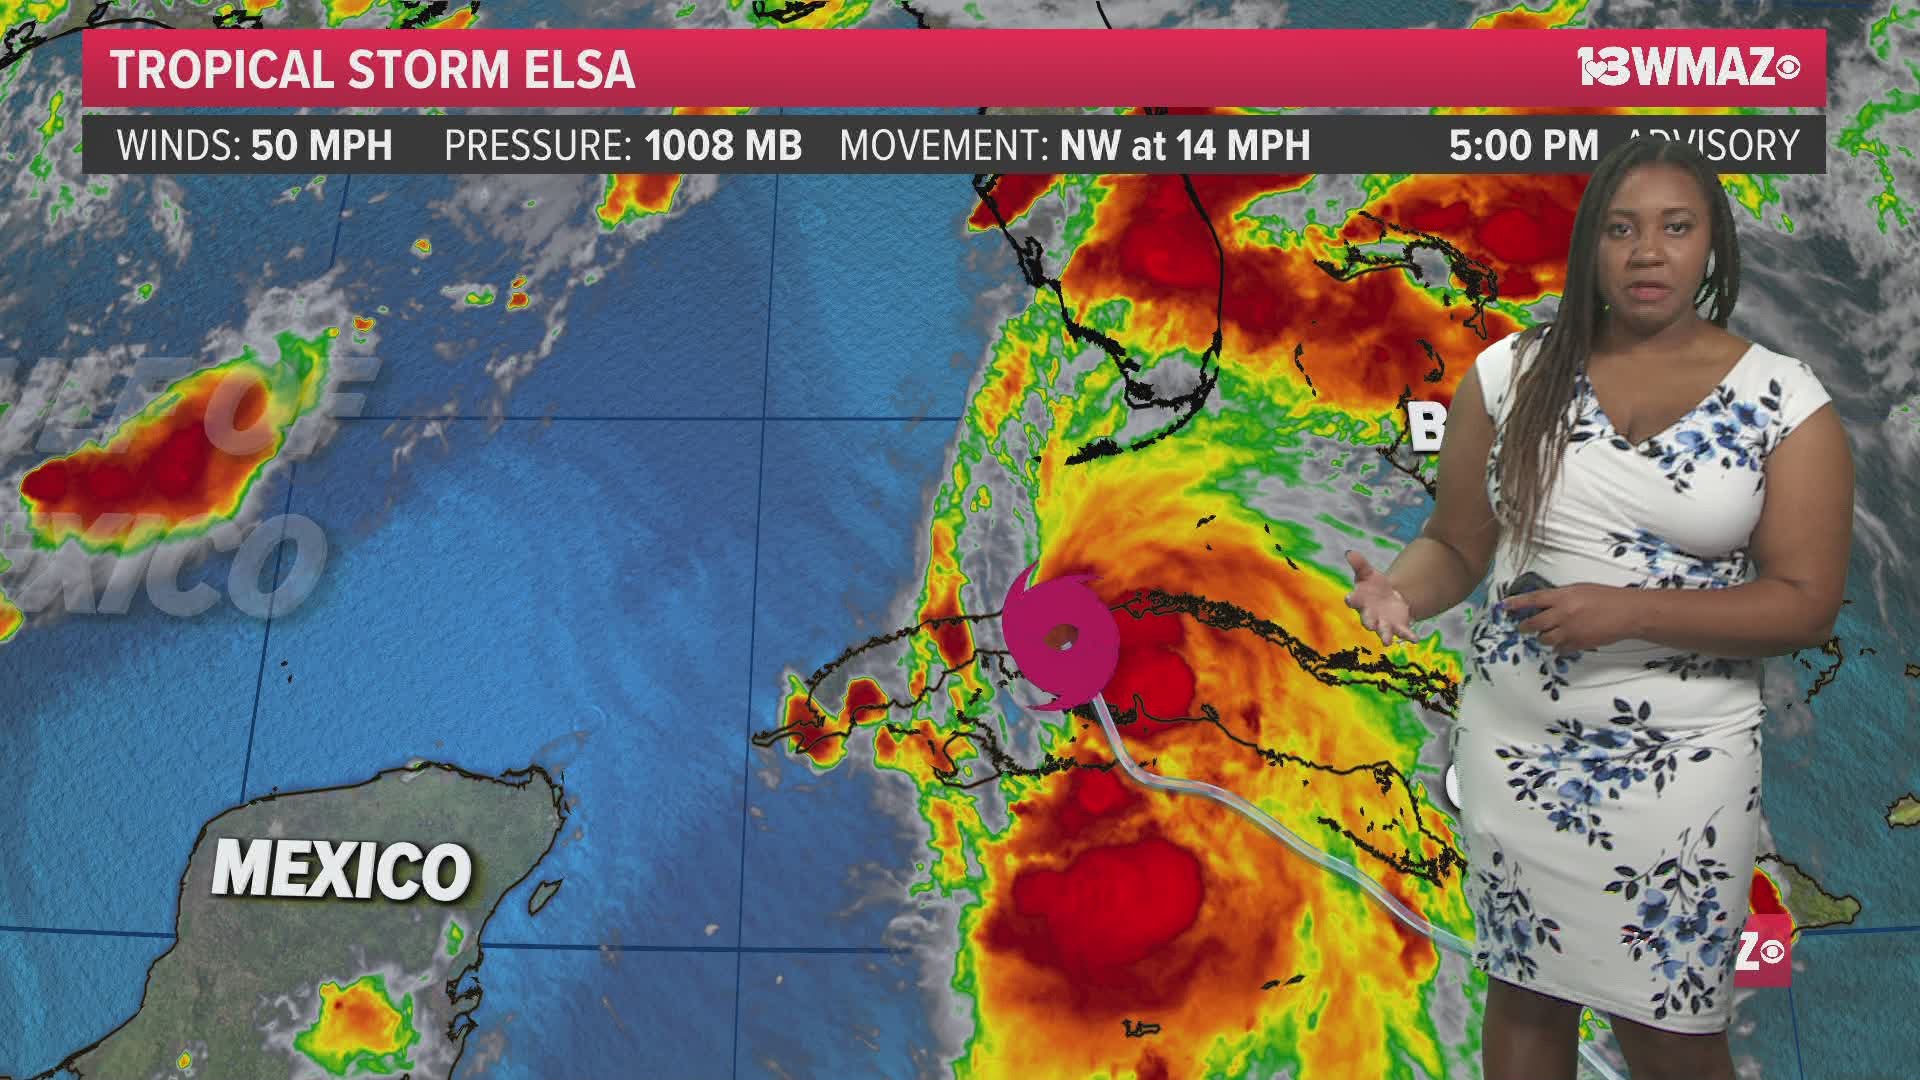 Tropical Storm Elsa is weakening over Cuba but is expected to re-strengthen in the Gulf of Mexico.